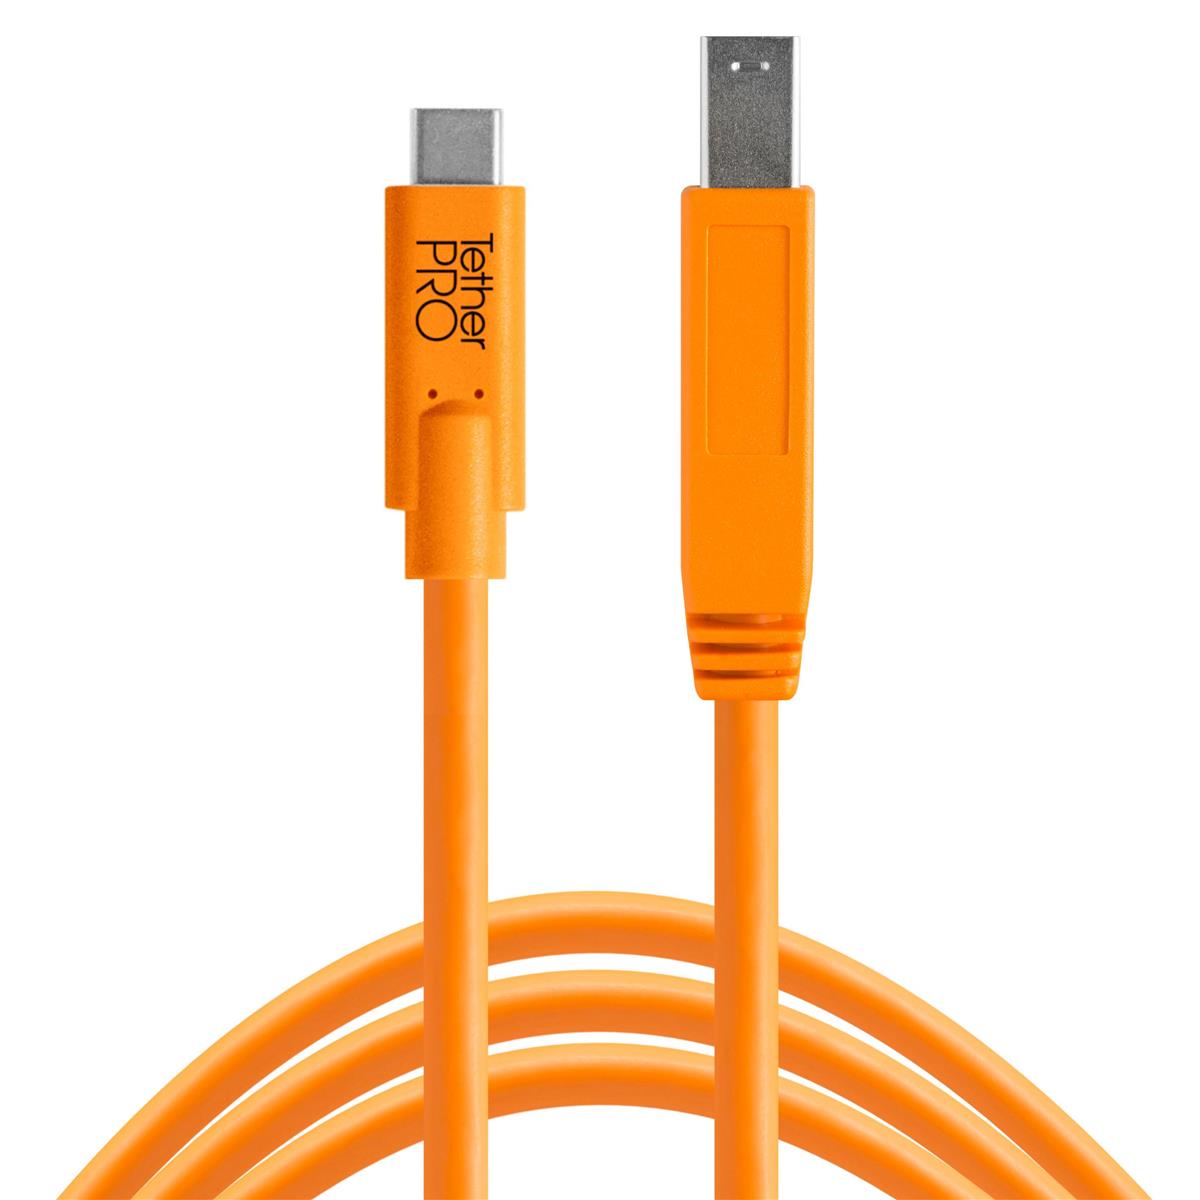 Tether Tools TetherPro USB Type-C Male  to USB 3.0 Type-B Male Cable (15', Orange)